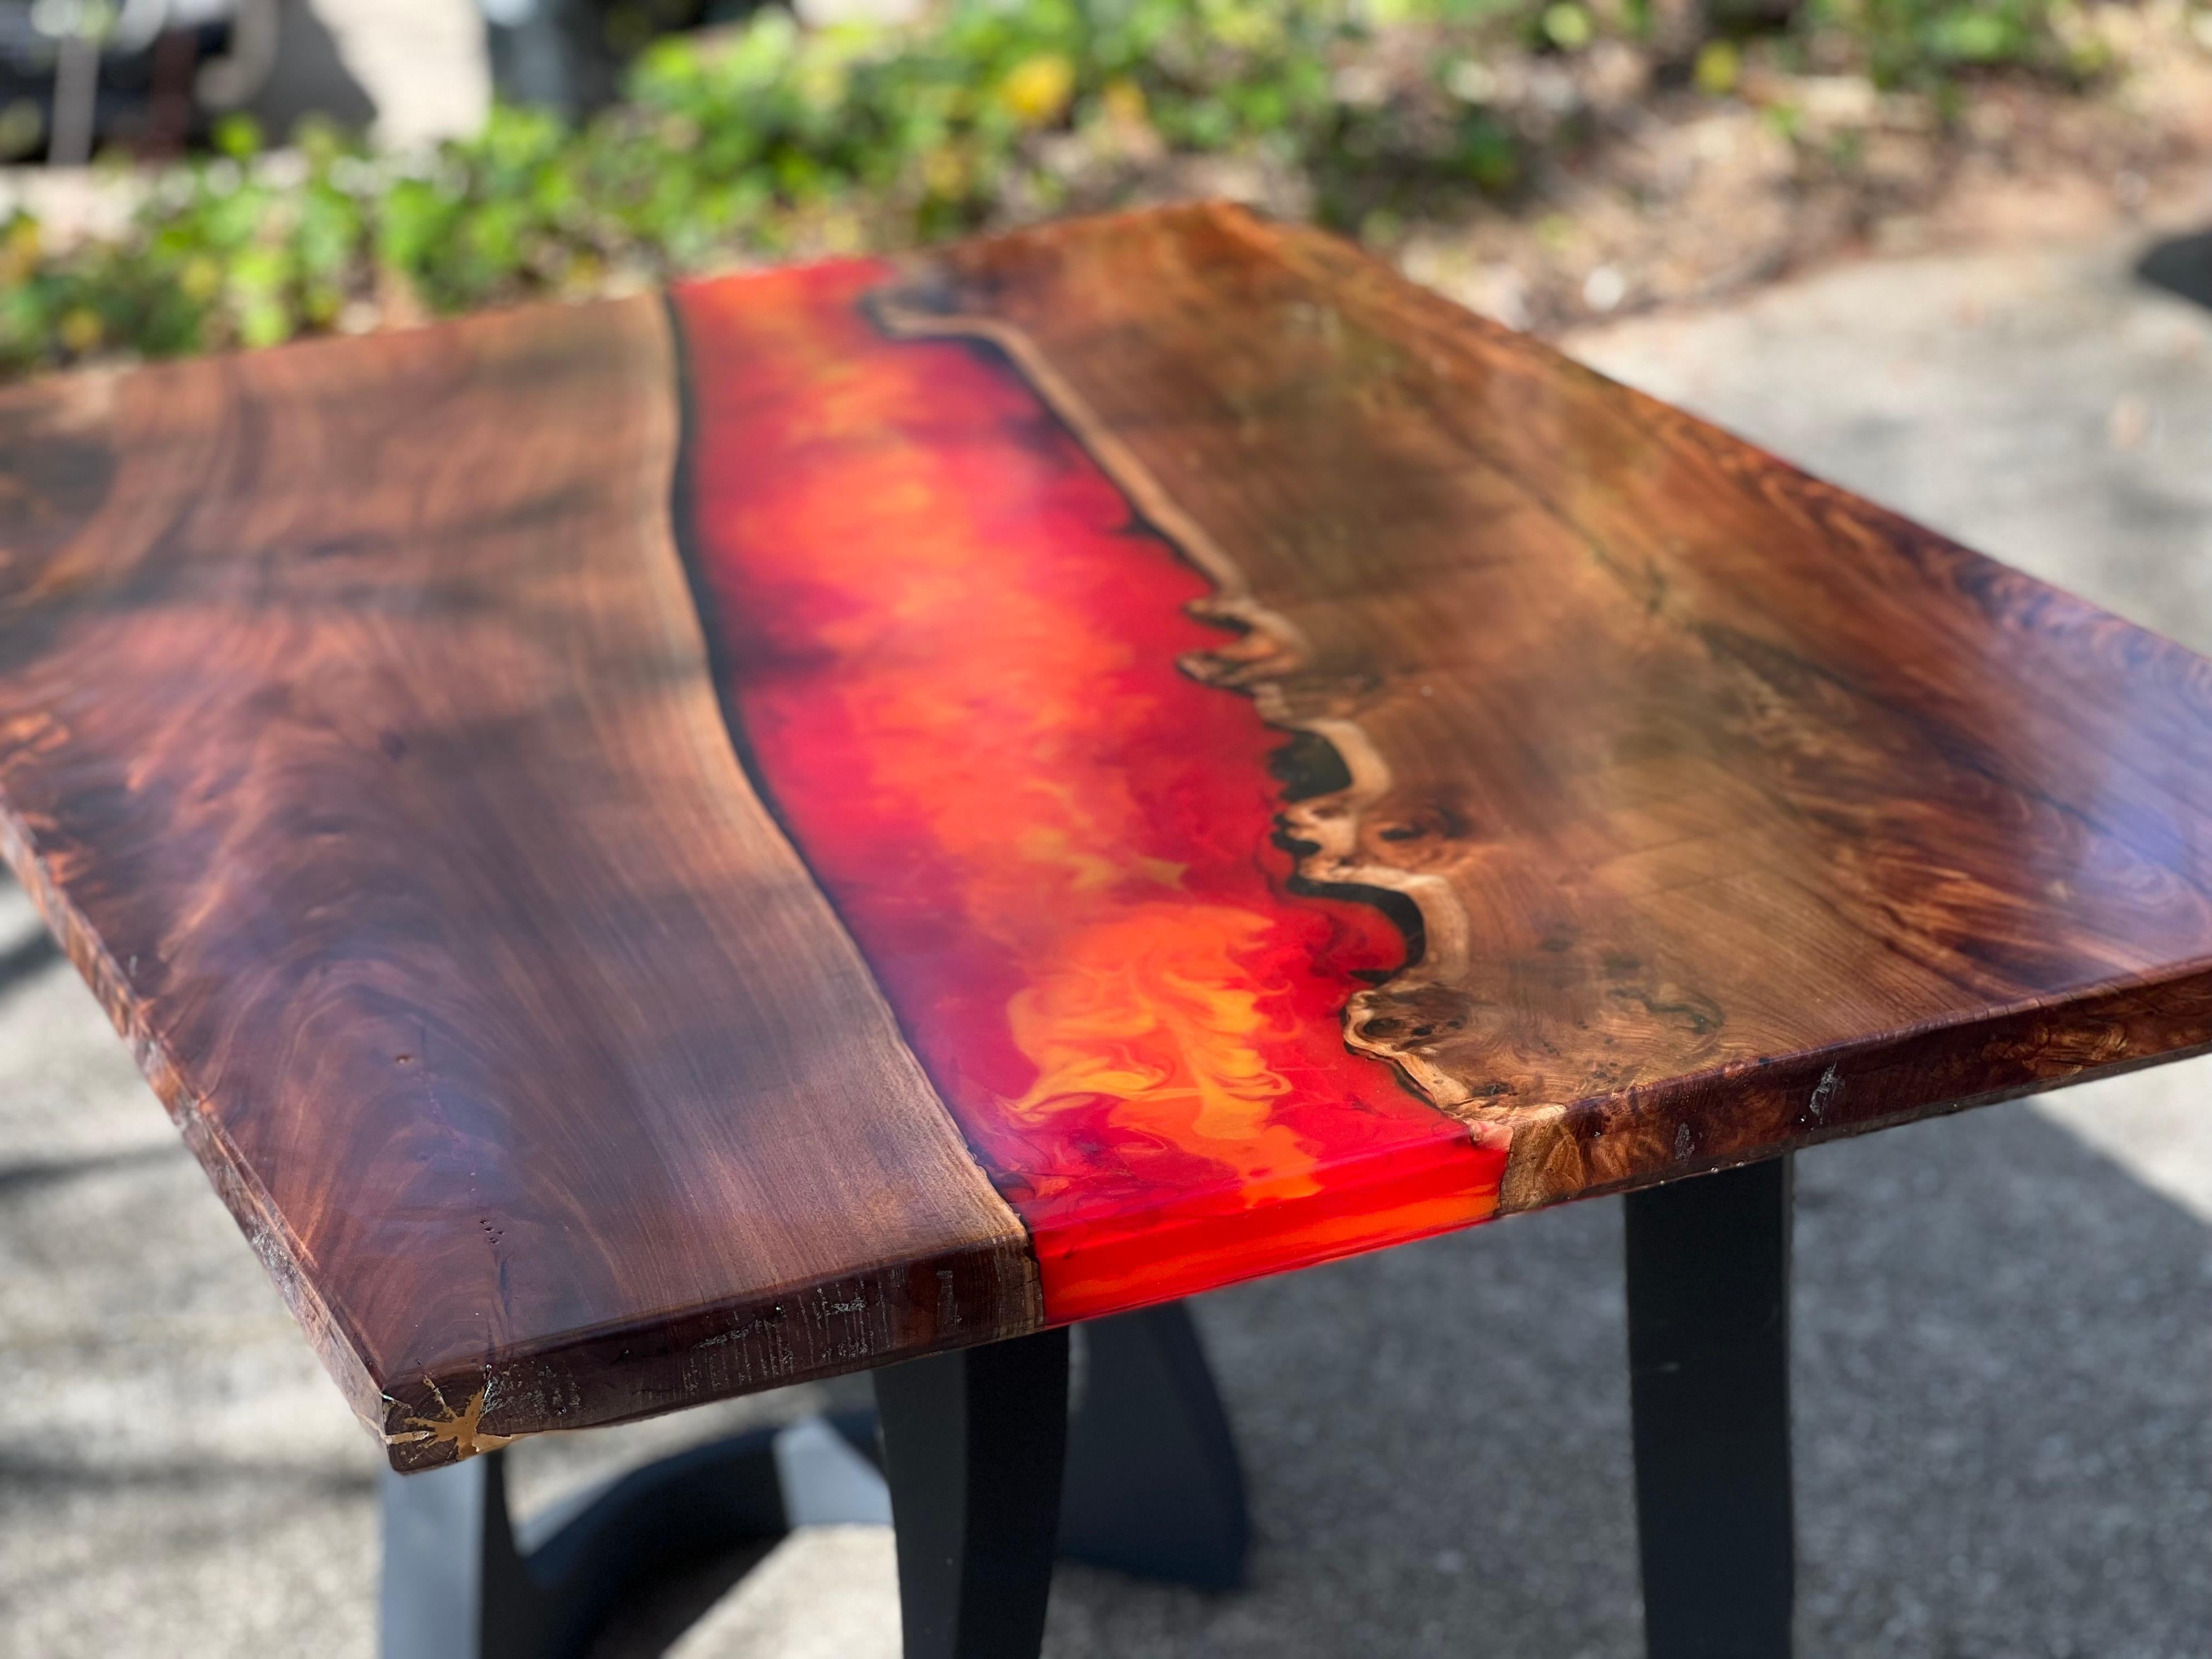 
Immerse yourself in the natural world with our custom dining table, a masterpiece forged from the marriage of live-edge wood and mesmerizing lava epoxy resin. This one-of-a-kind creation encapsulates the raw beauty of nature and the modern artistry